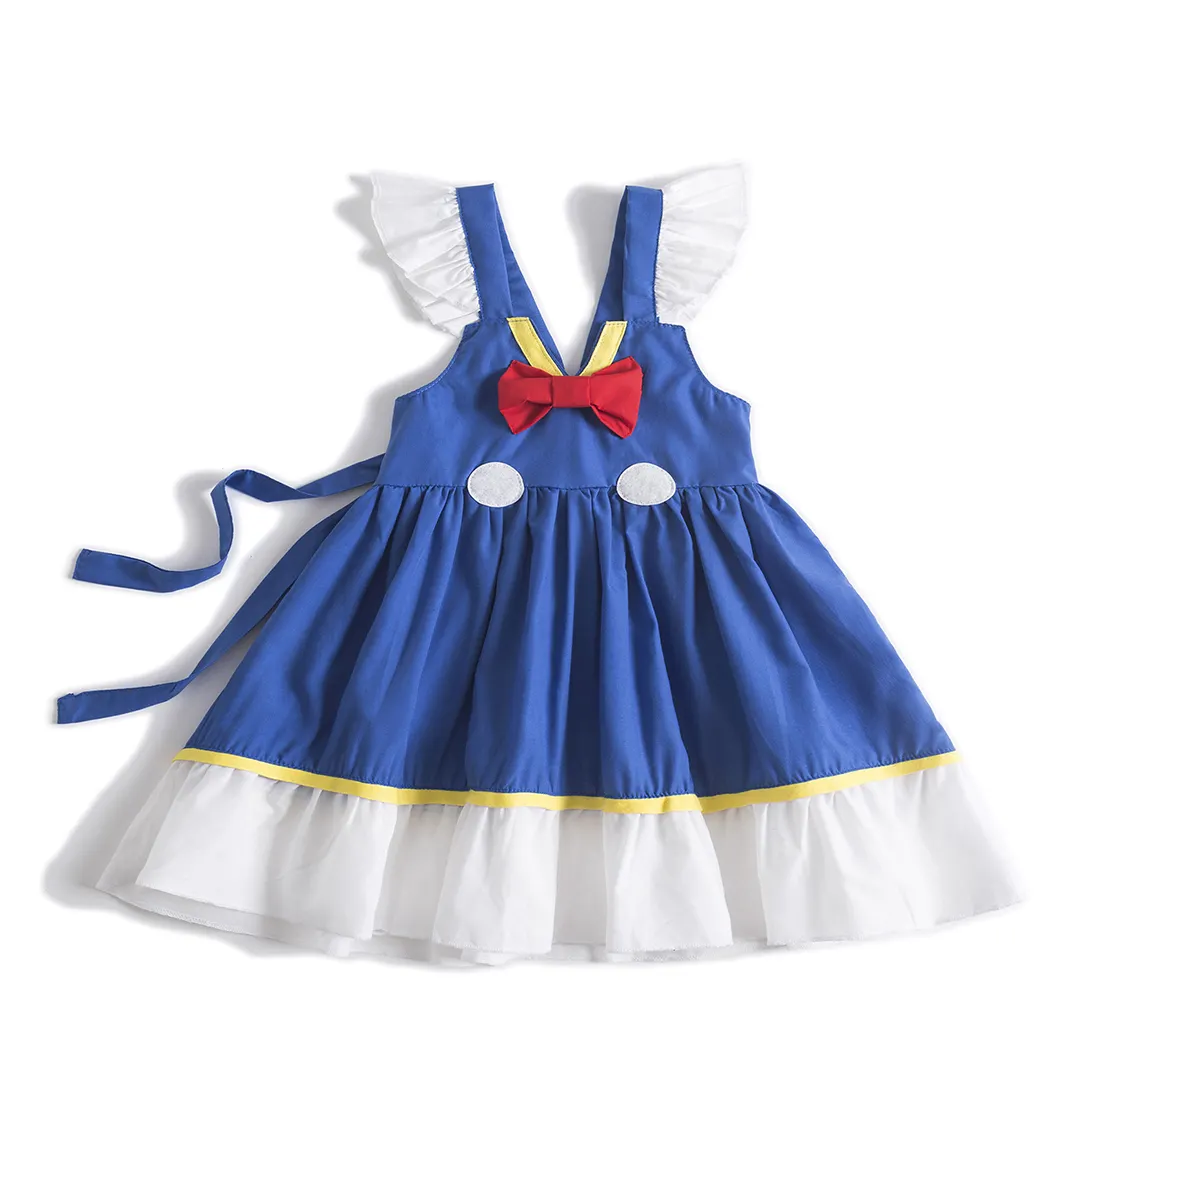 Princess dresses for girls 5 to 10 years Donald Duck Dress inspired by Disney's Mickey and friends Minnie winnie pooh